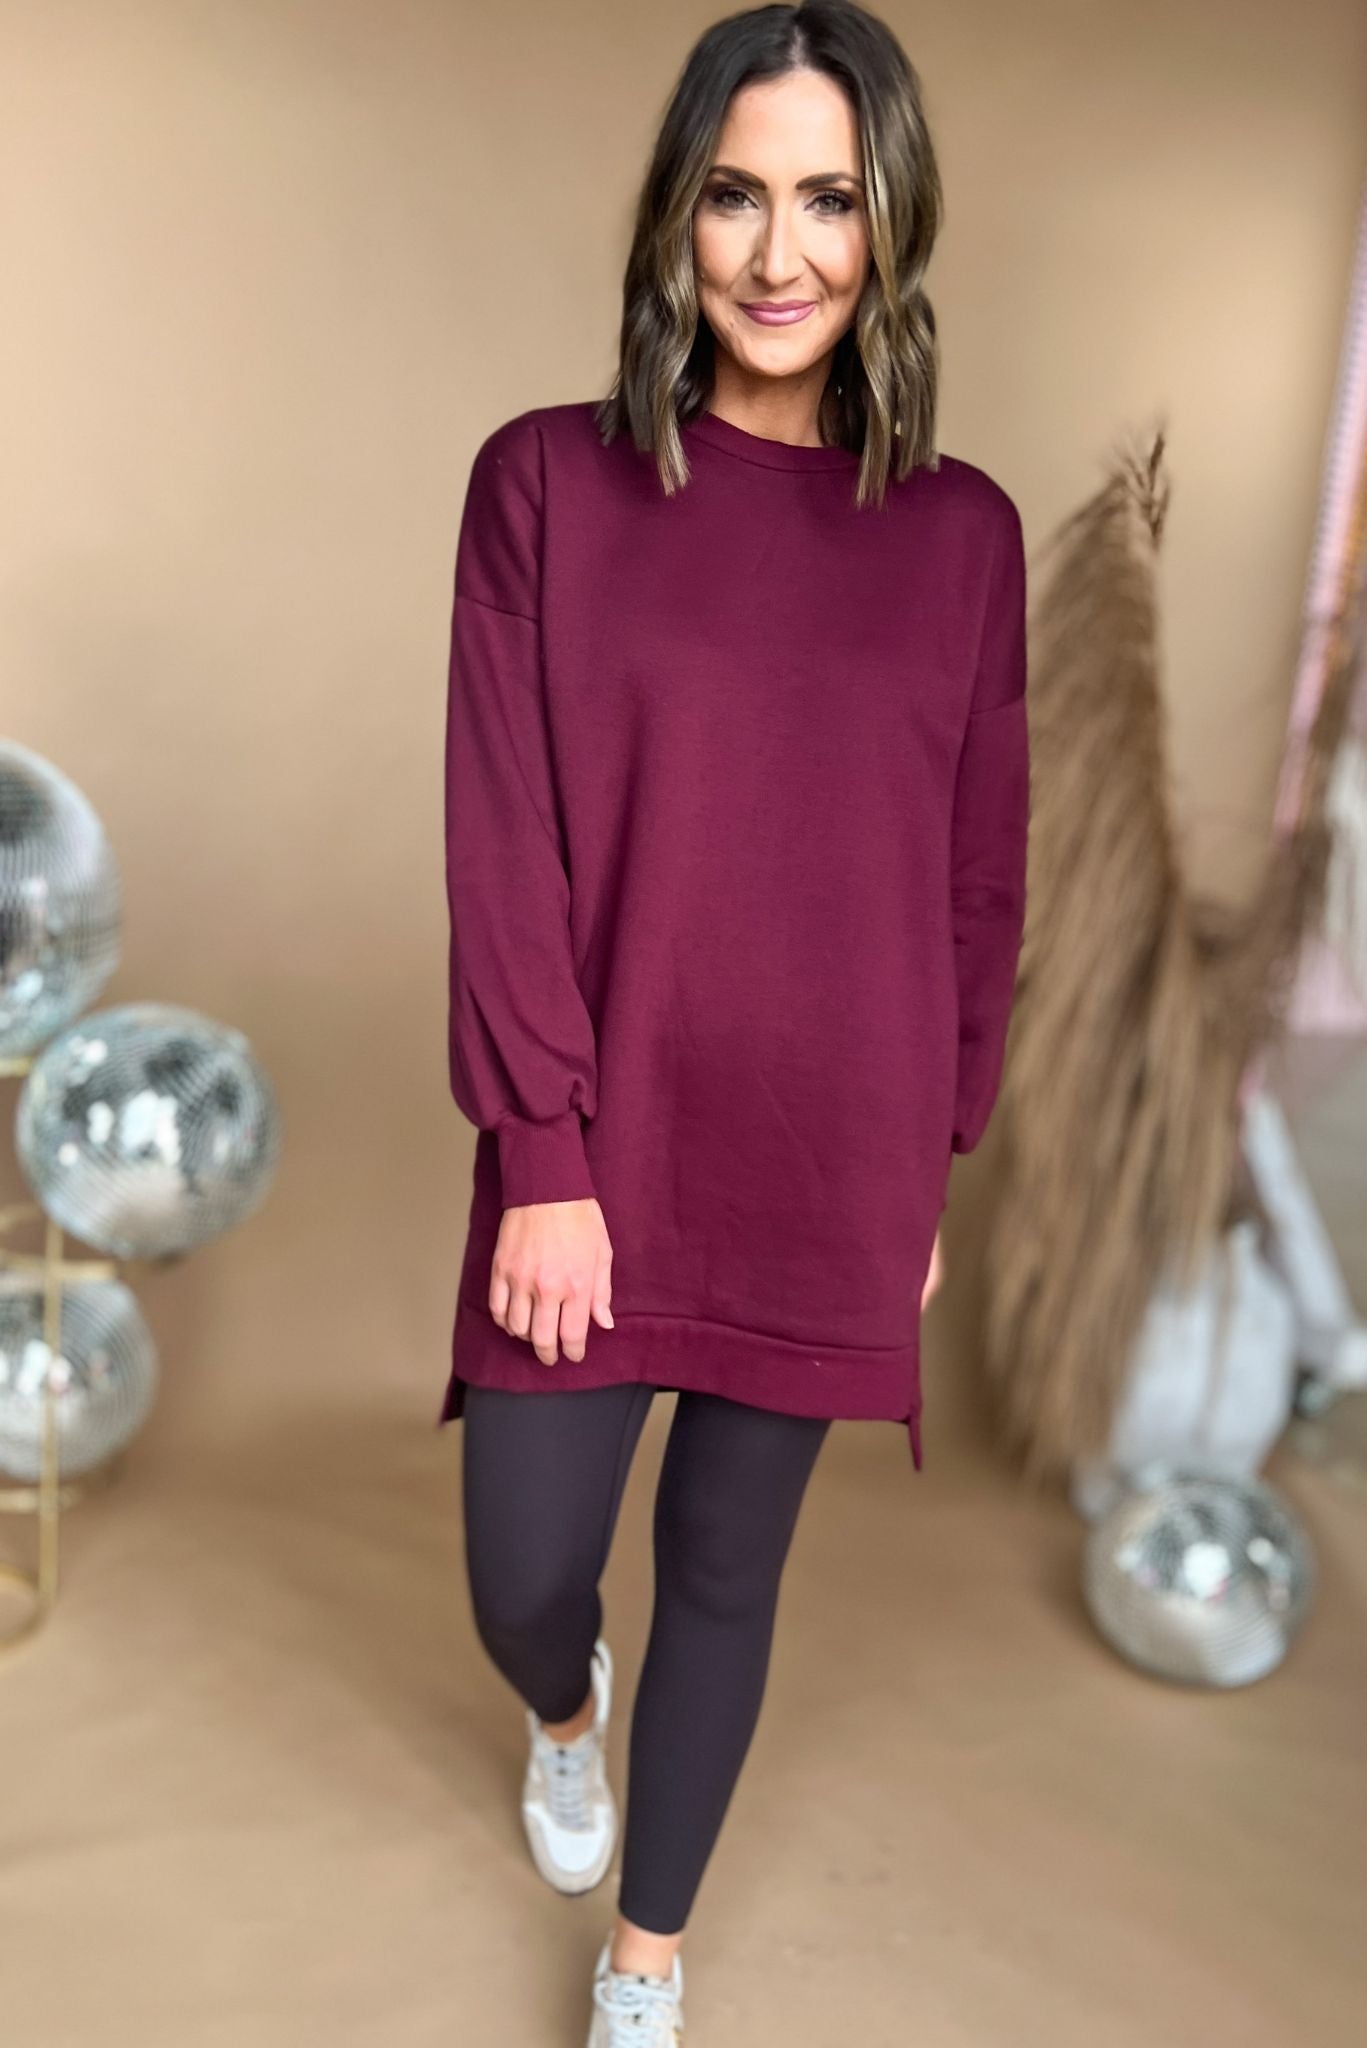 Load image into Gallery viewer, Burgundy Round Neck Longline Hi Low Sweatshirt Dress, fall fashion, must have, oversized fit, sweatshirt, travel look, mom style, shop style your senses by mallory fitzsimmons
